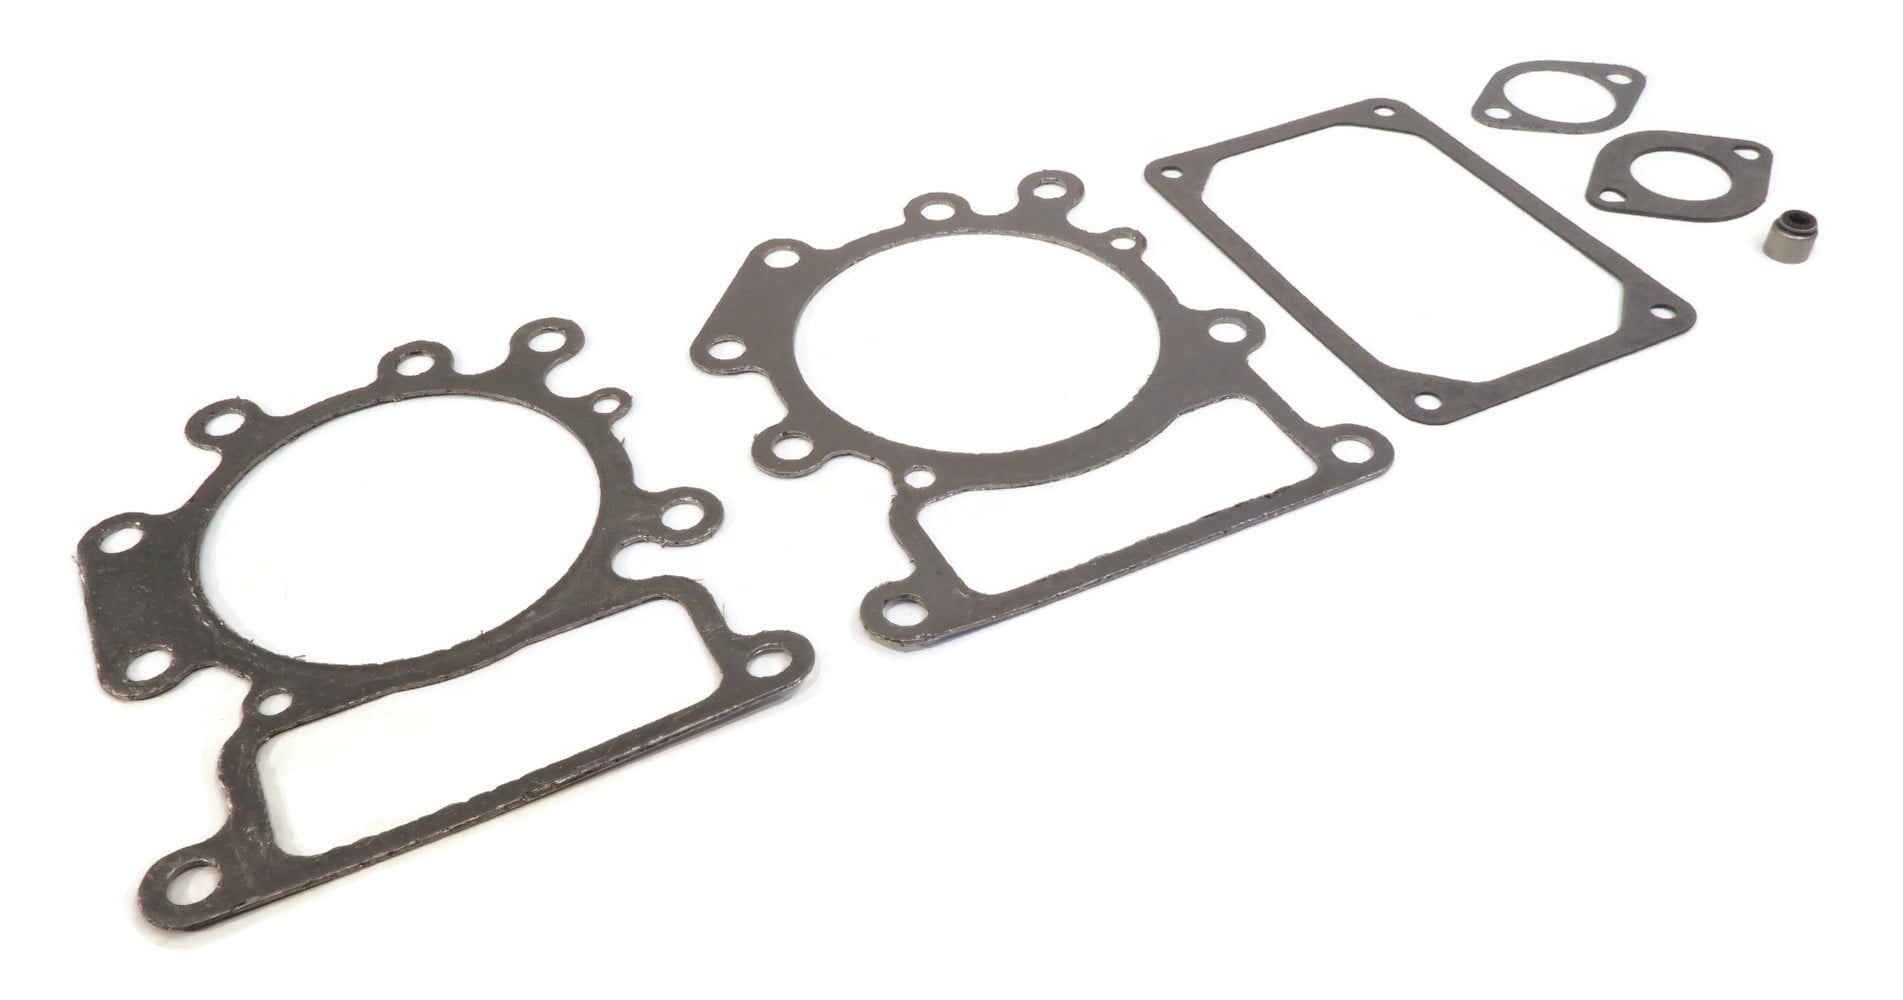 Details about   New Valve Gasket Set for  794152 Replaces 690190 free USPS 